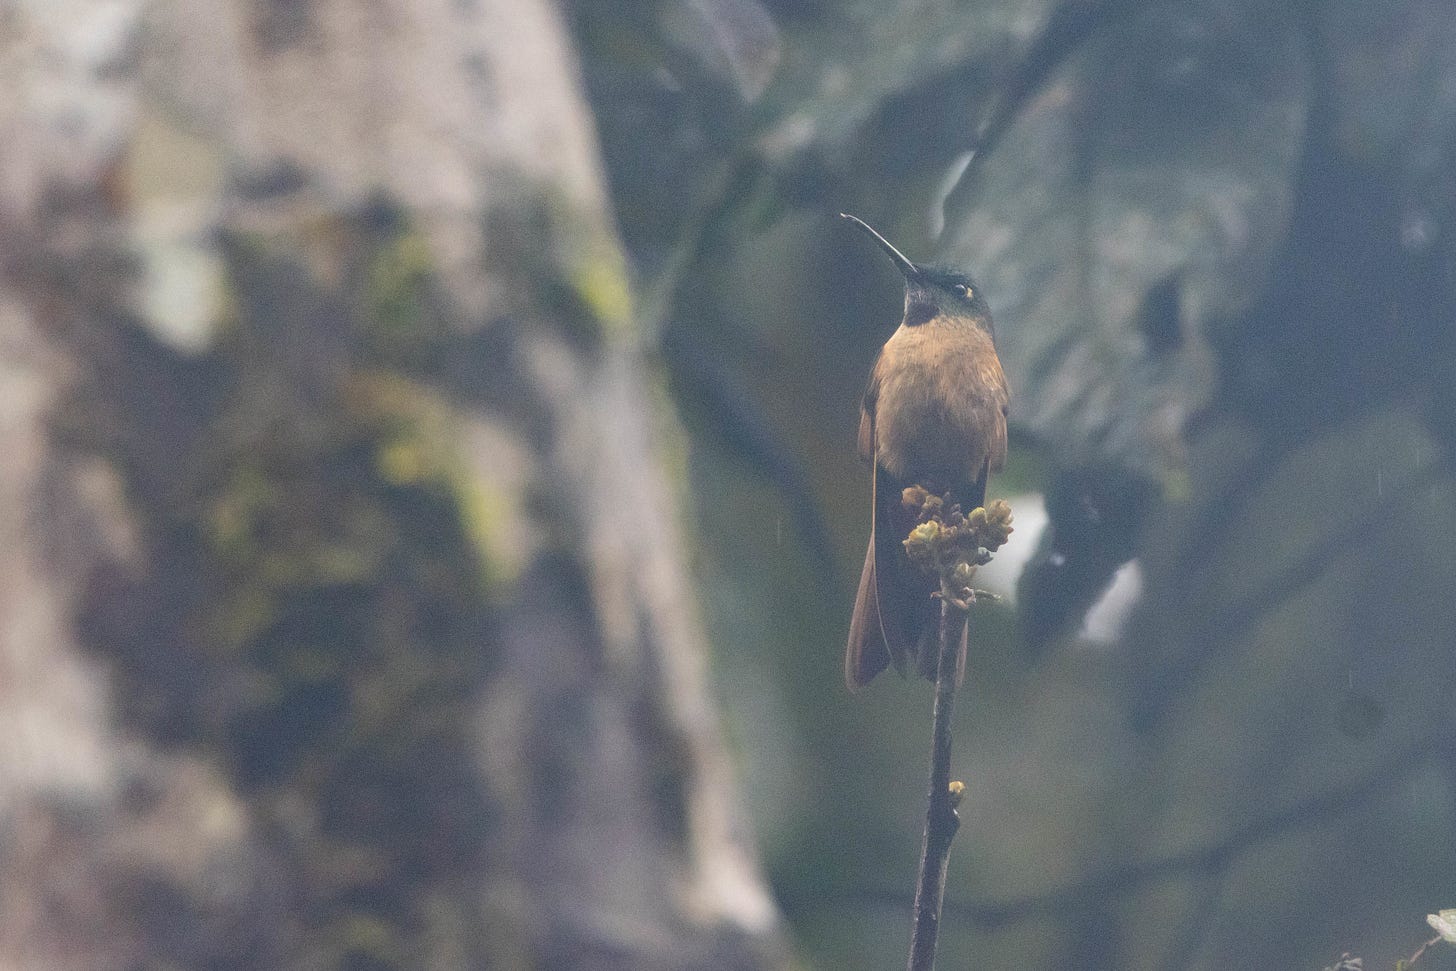 a hummingbird perched on a thin twig in the right third of the image, facing the viewer and looking to the left. it is set against a blurry background, a pale gray-brown, moss covered tree trunk on the left, and dark forest-green foliage on the right. the bird has a pale, rust-colored belly and greenish head with a darker throat, slightly curved thin black beak, and a white spot behind its eye.